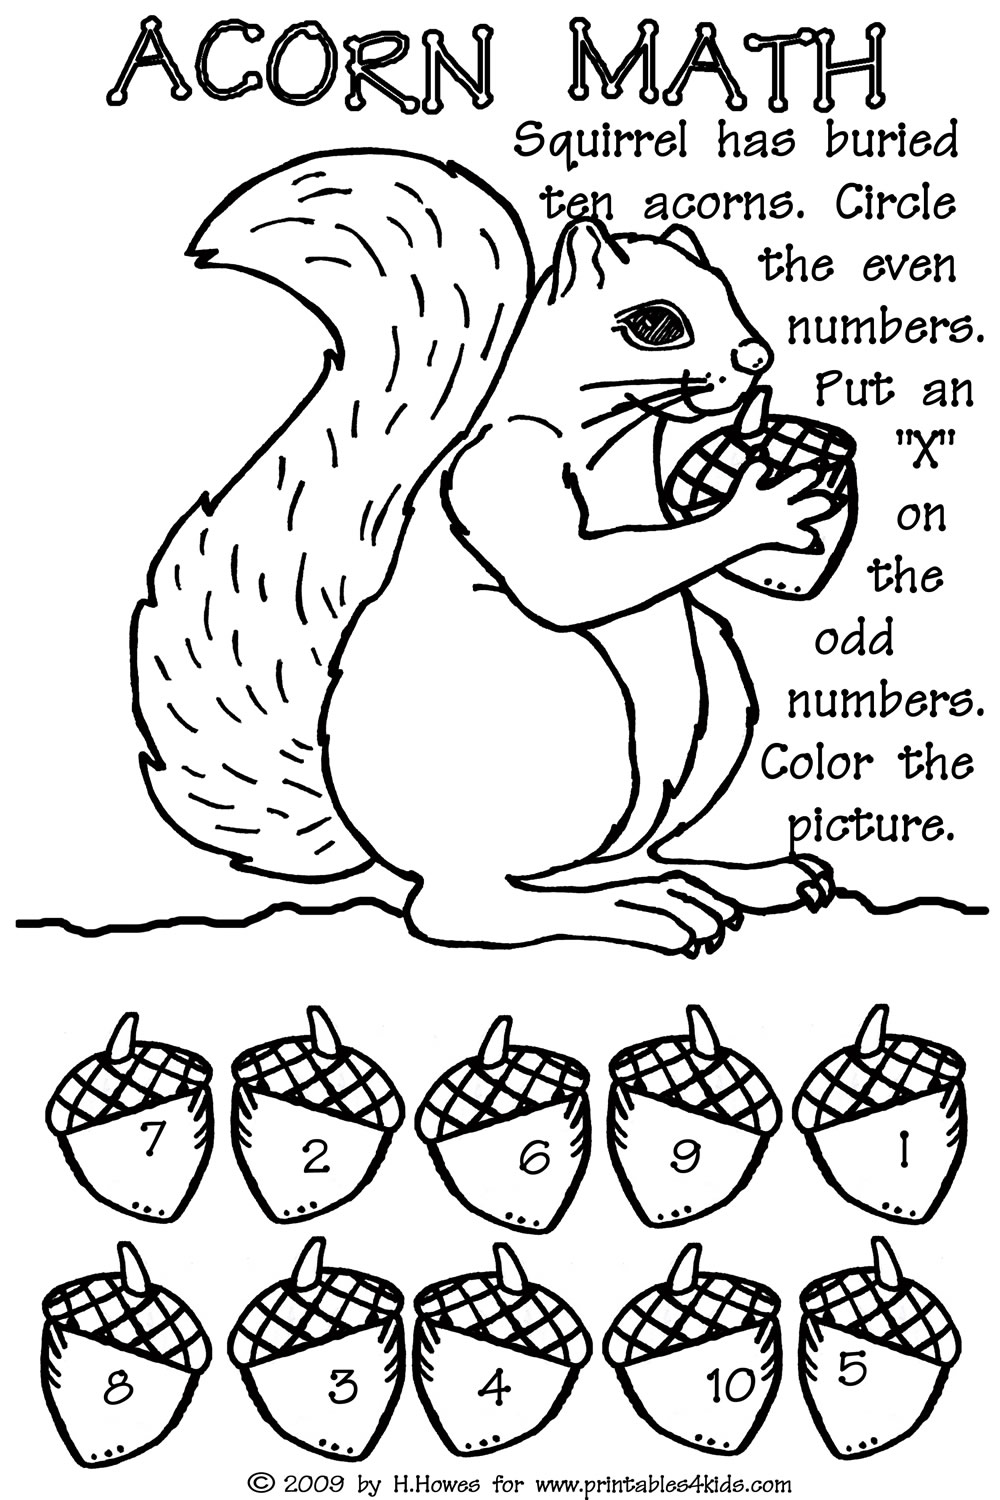 Odd and Even Math Concepts for Preschool – Fall Acorn Theme Printables for Kids – free word search puzzles coloring pages and other activities